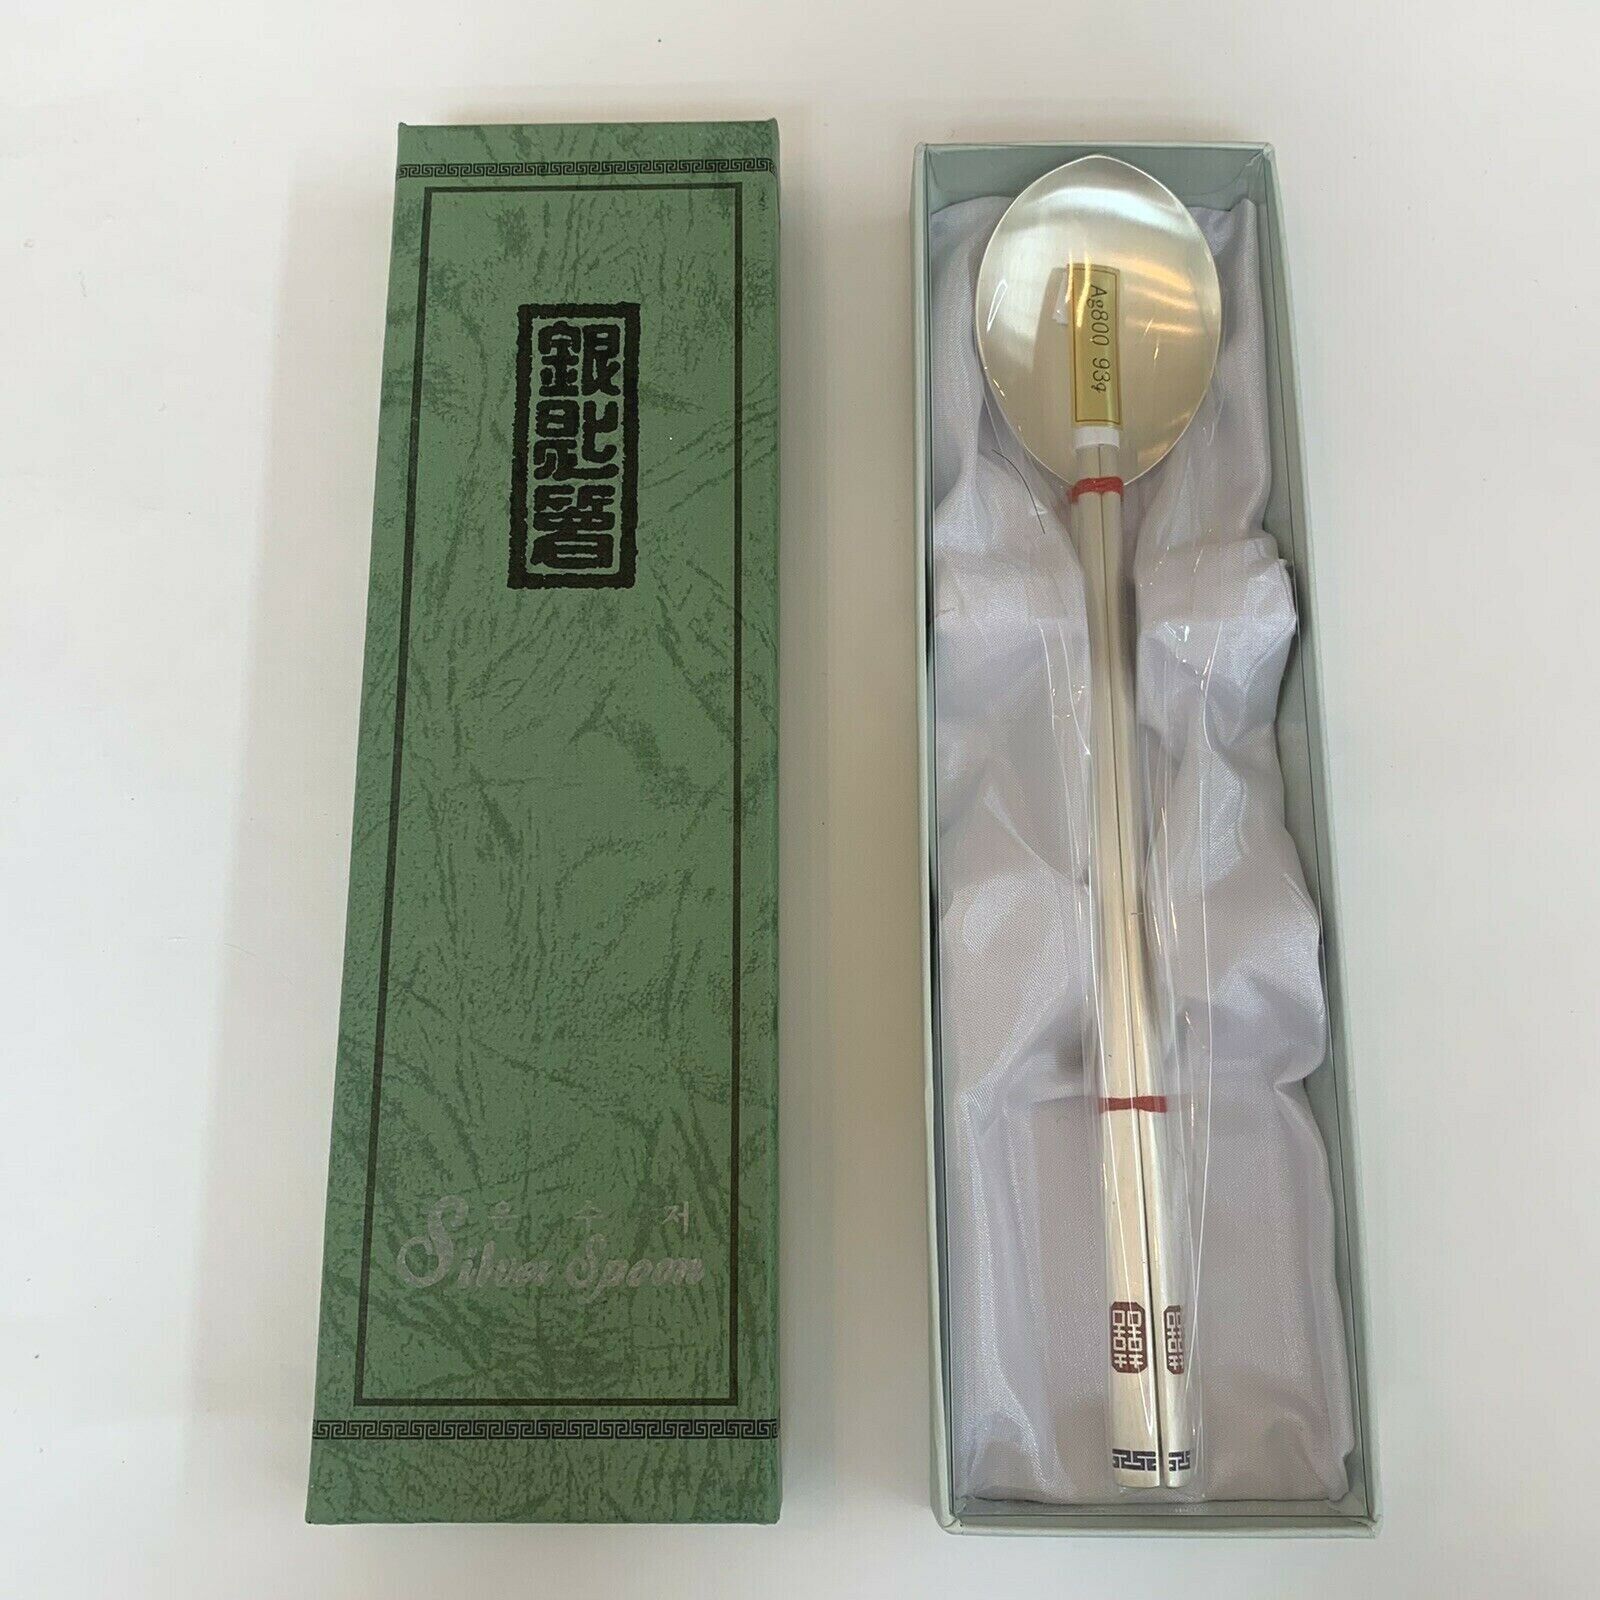 NEW Silver Spoon and Chopsticks Korean Set 80% REAL SILVER 93g AG800 NEW IN BOX